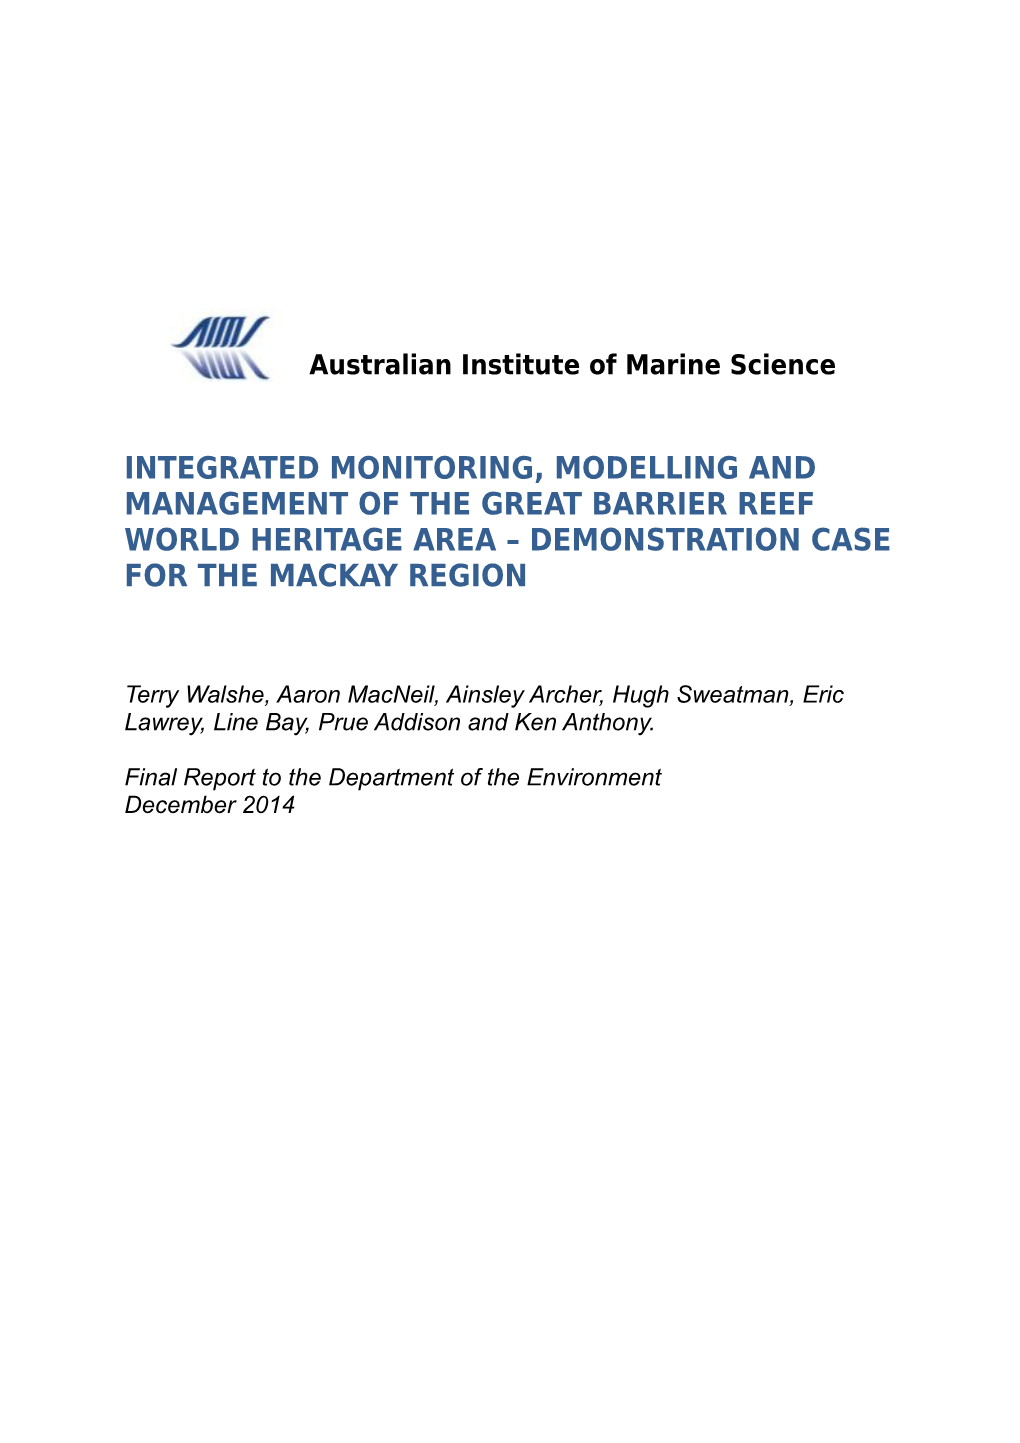 Integrated Monitoring, Modelling and Management of the GBRWHA Demonstration Case for The